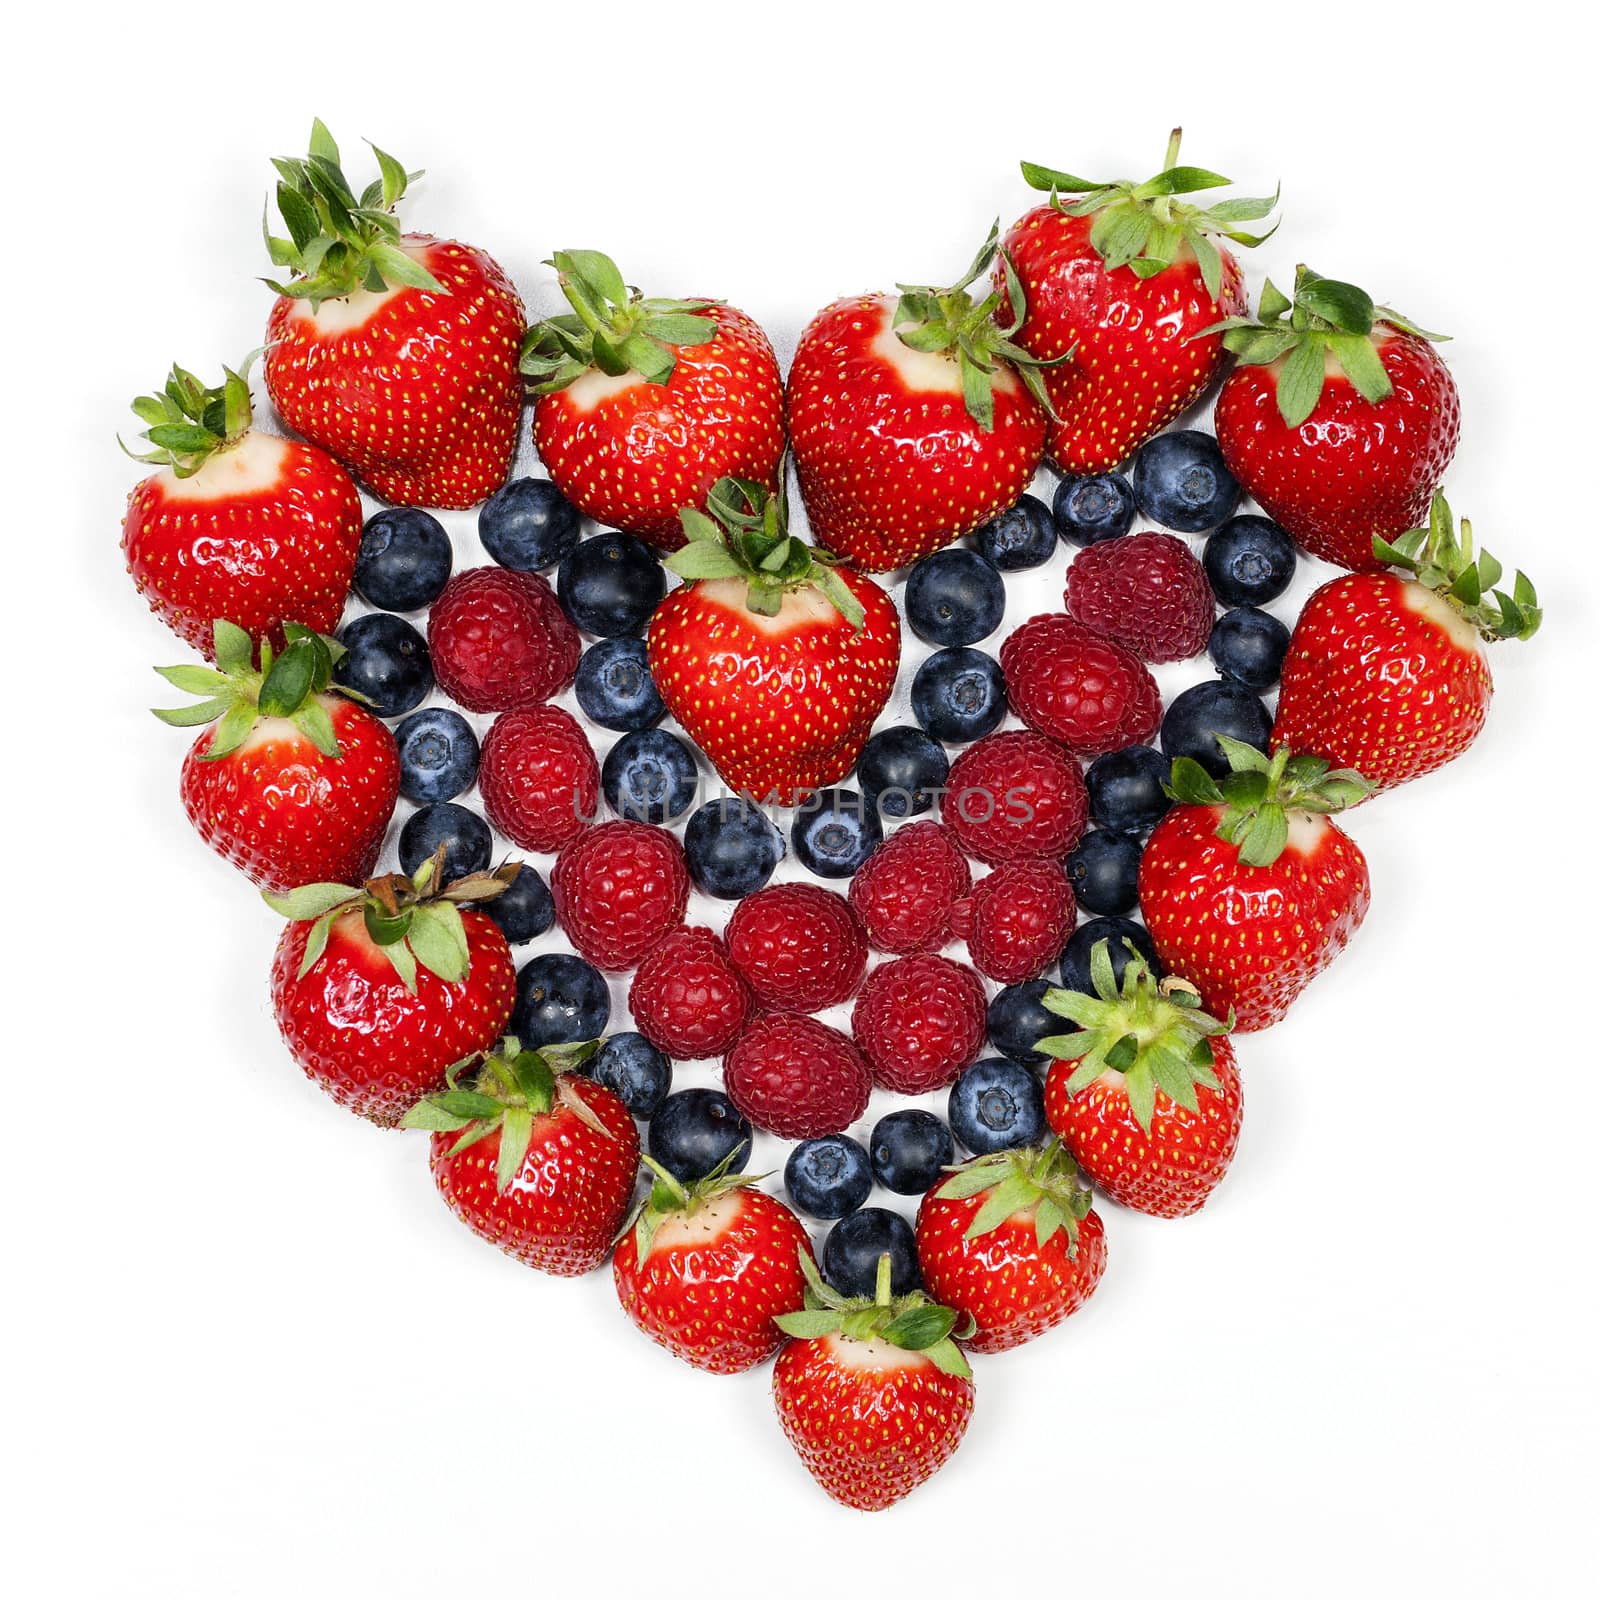 red fruit heart by vwalakte